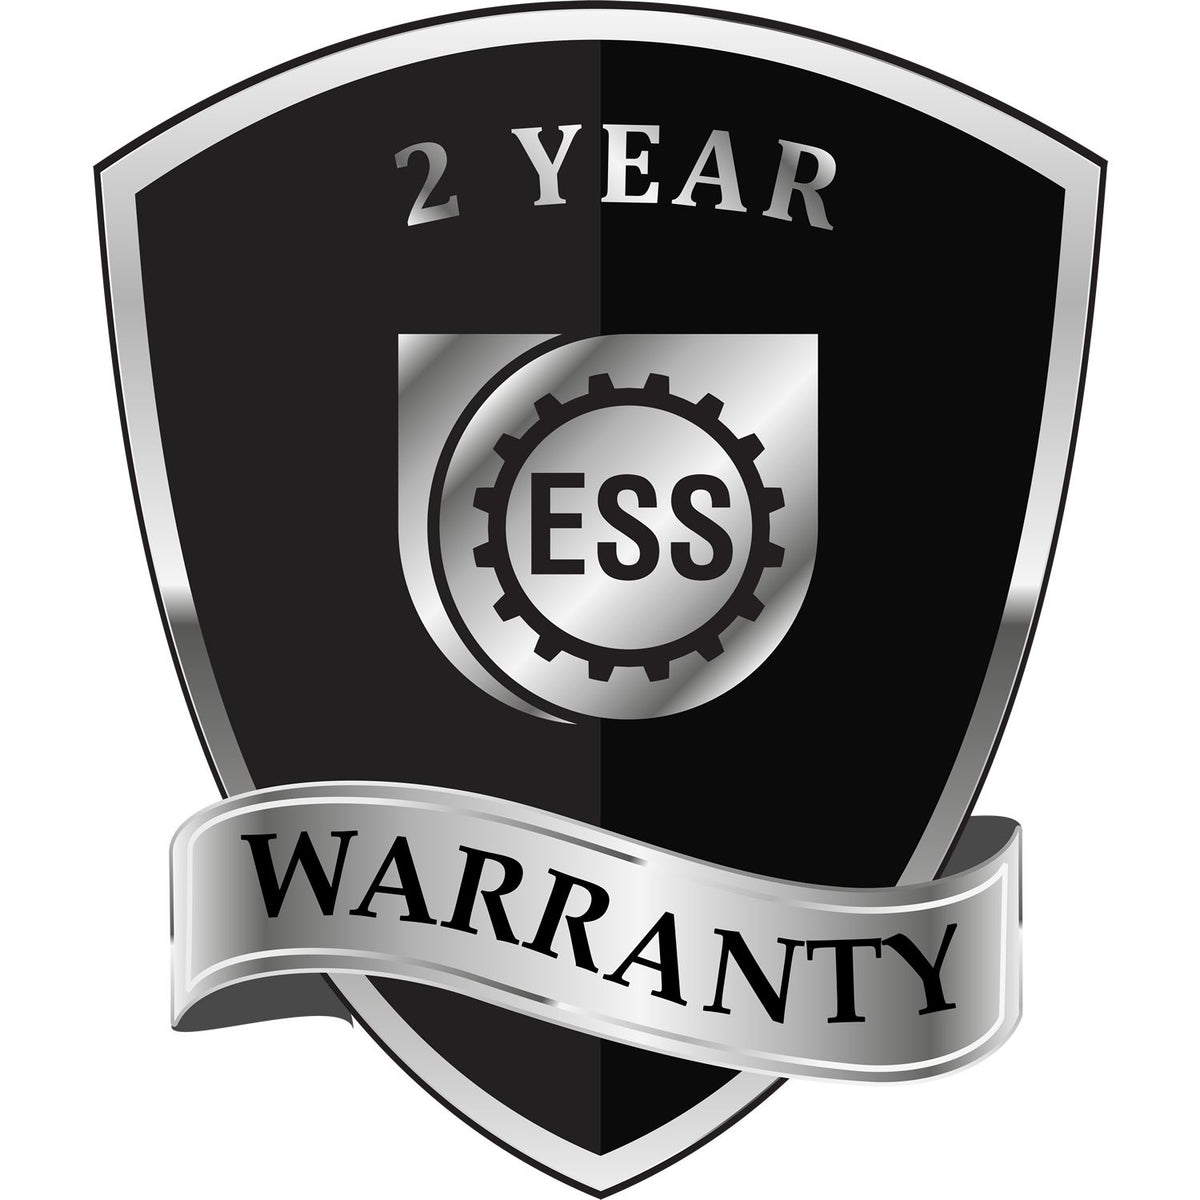 A badge or emblem showing a warranty icon for the Long Reach California PE Seal